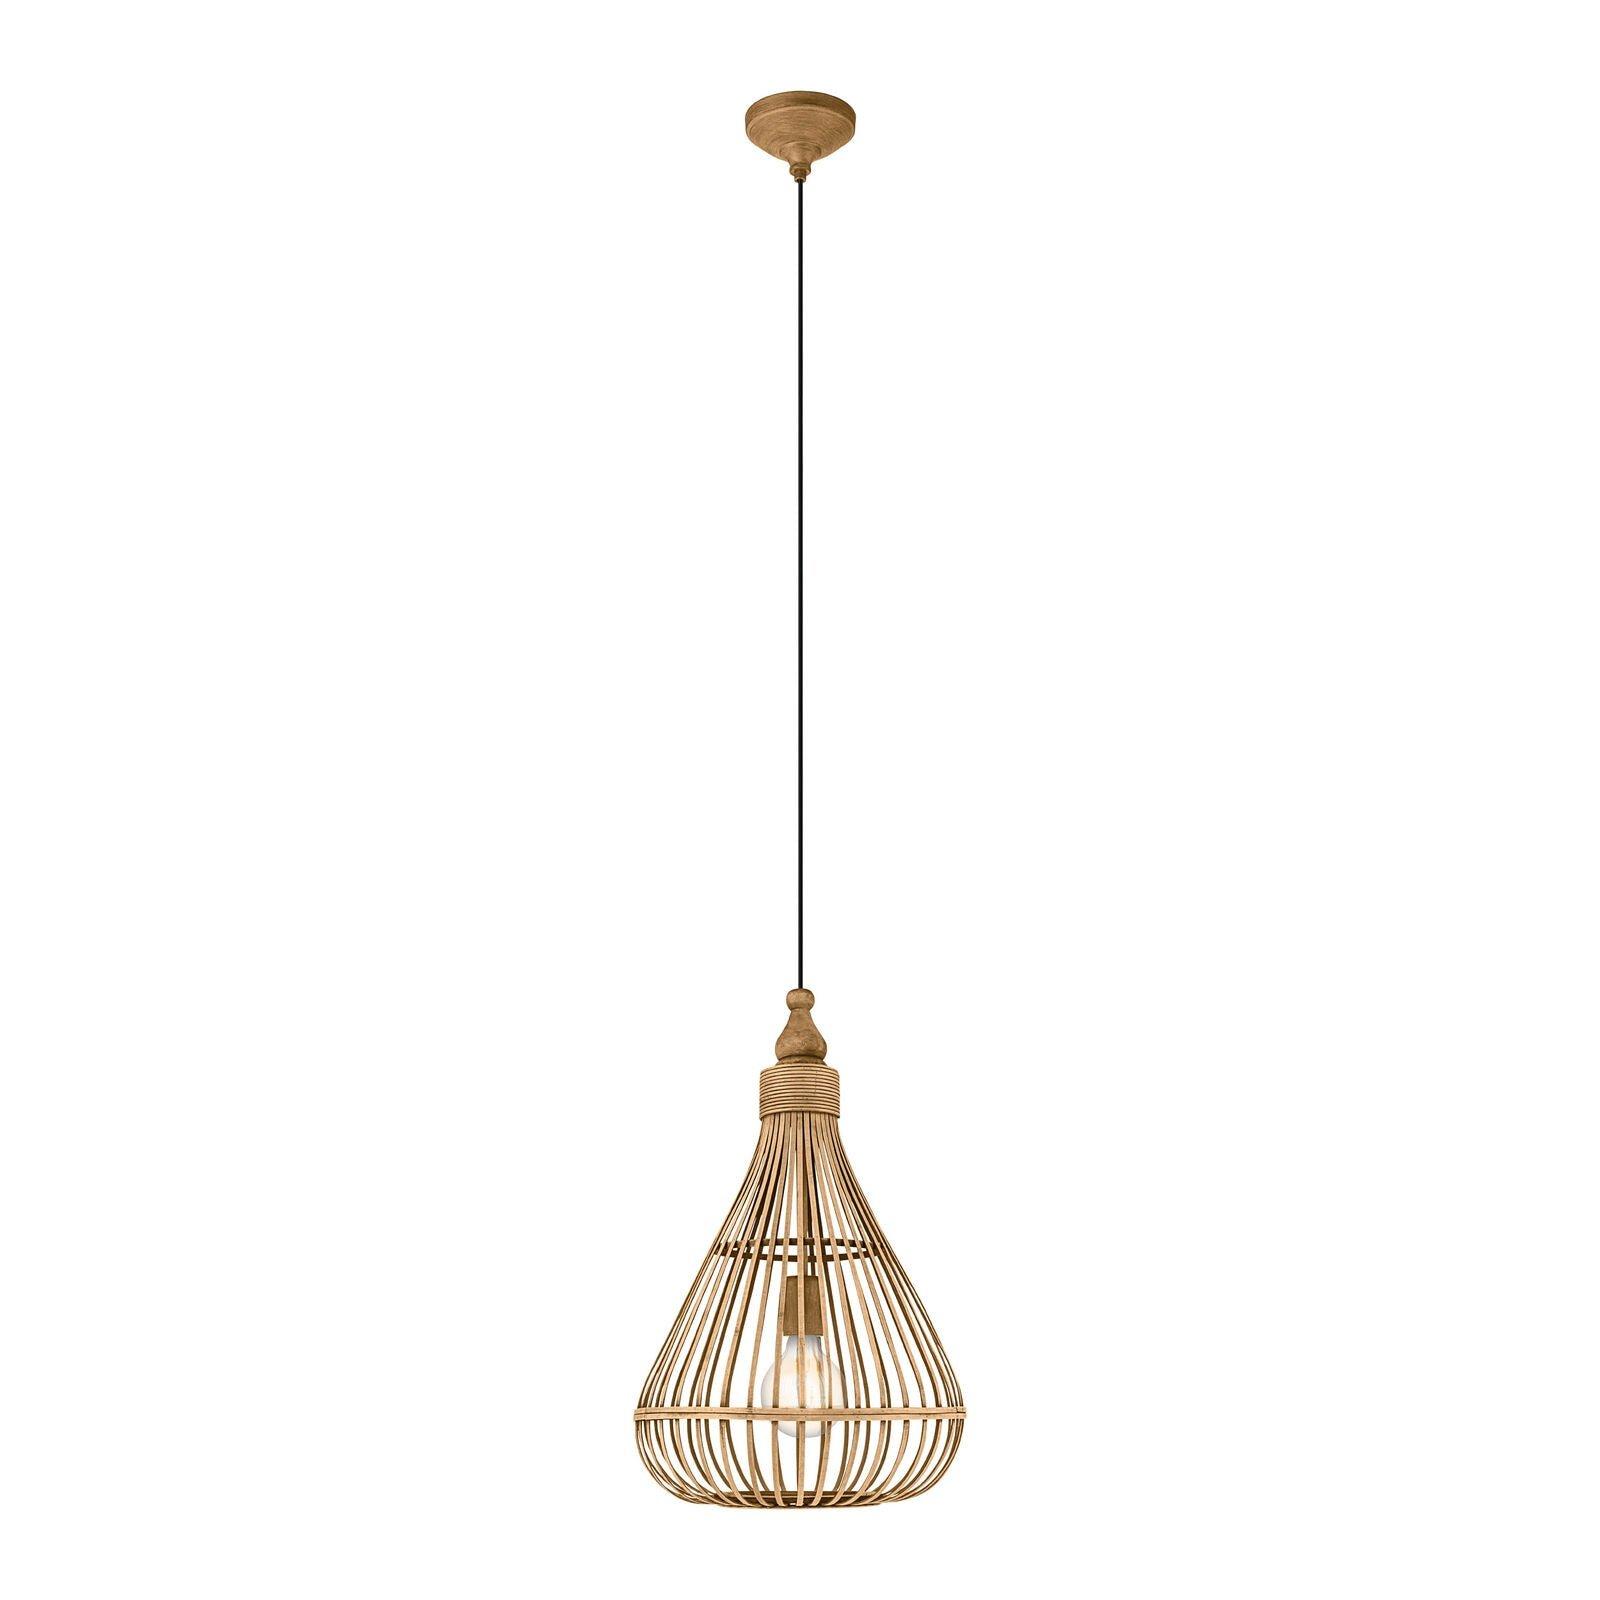 Hanging Ceiling Pendant Light Pear Wicker Shade 1 x 60W E27 Hallway Feature